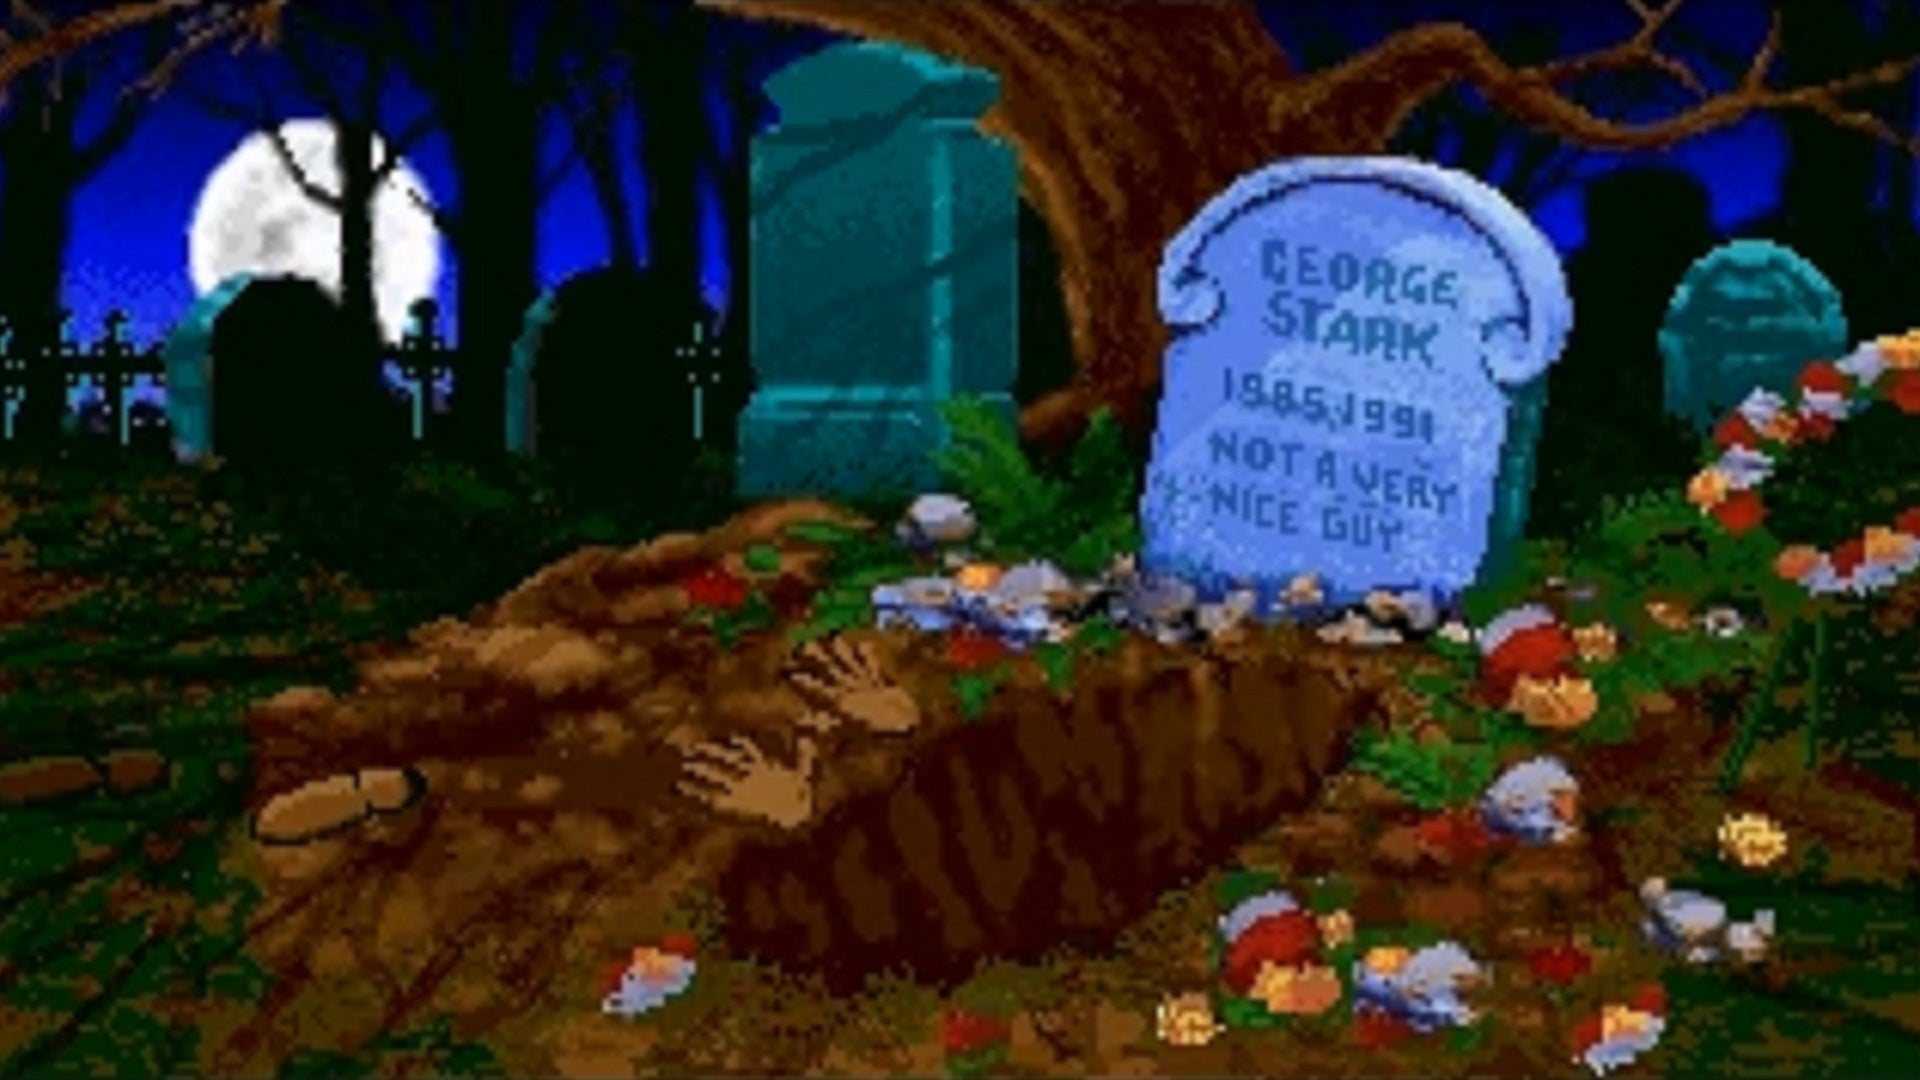 A gravestone in a moonlit cemetery. The inscription reads "George Stark, 1985-1991. Not a very nice guy."